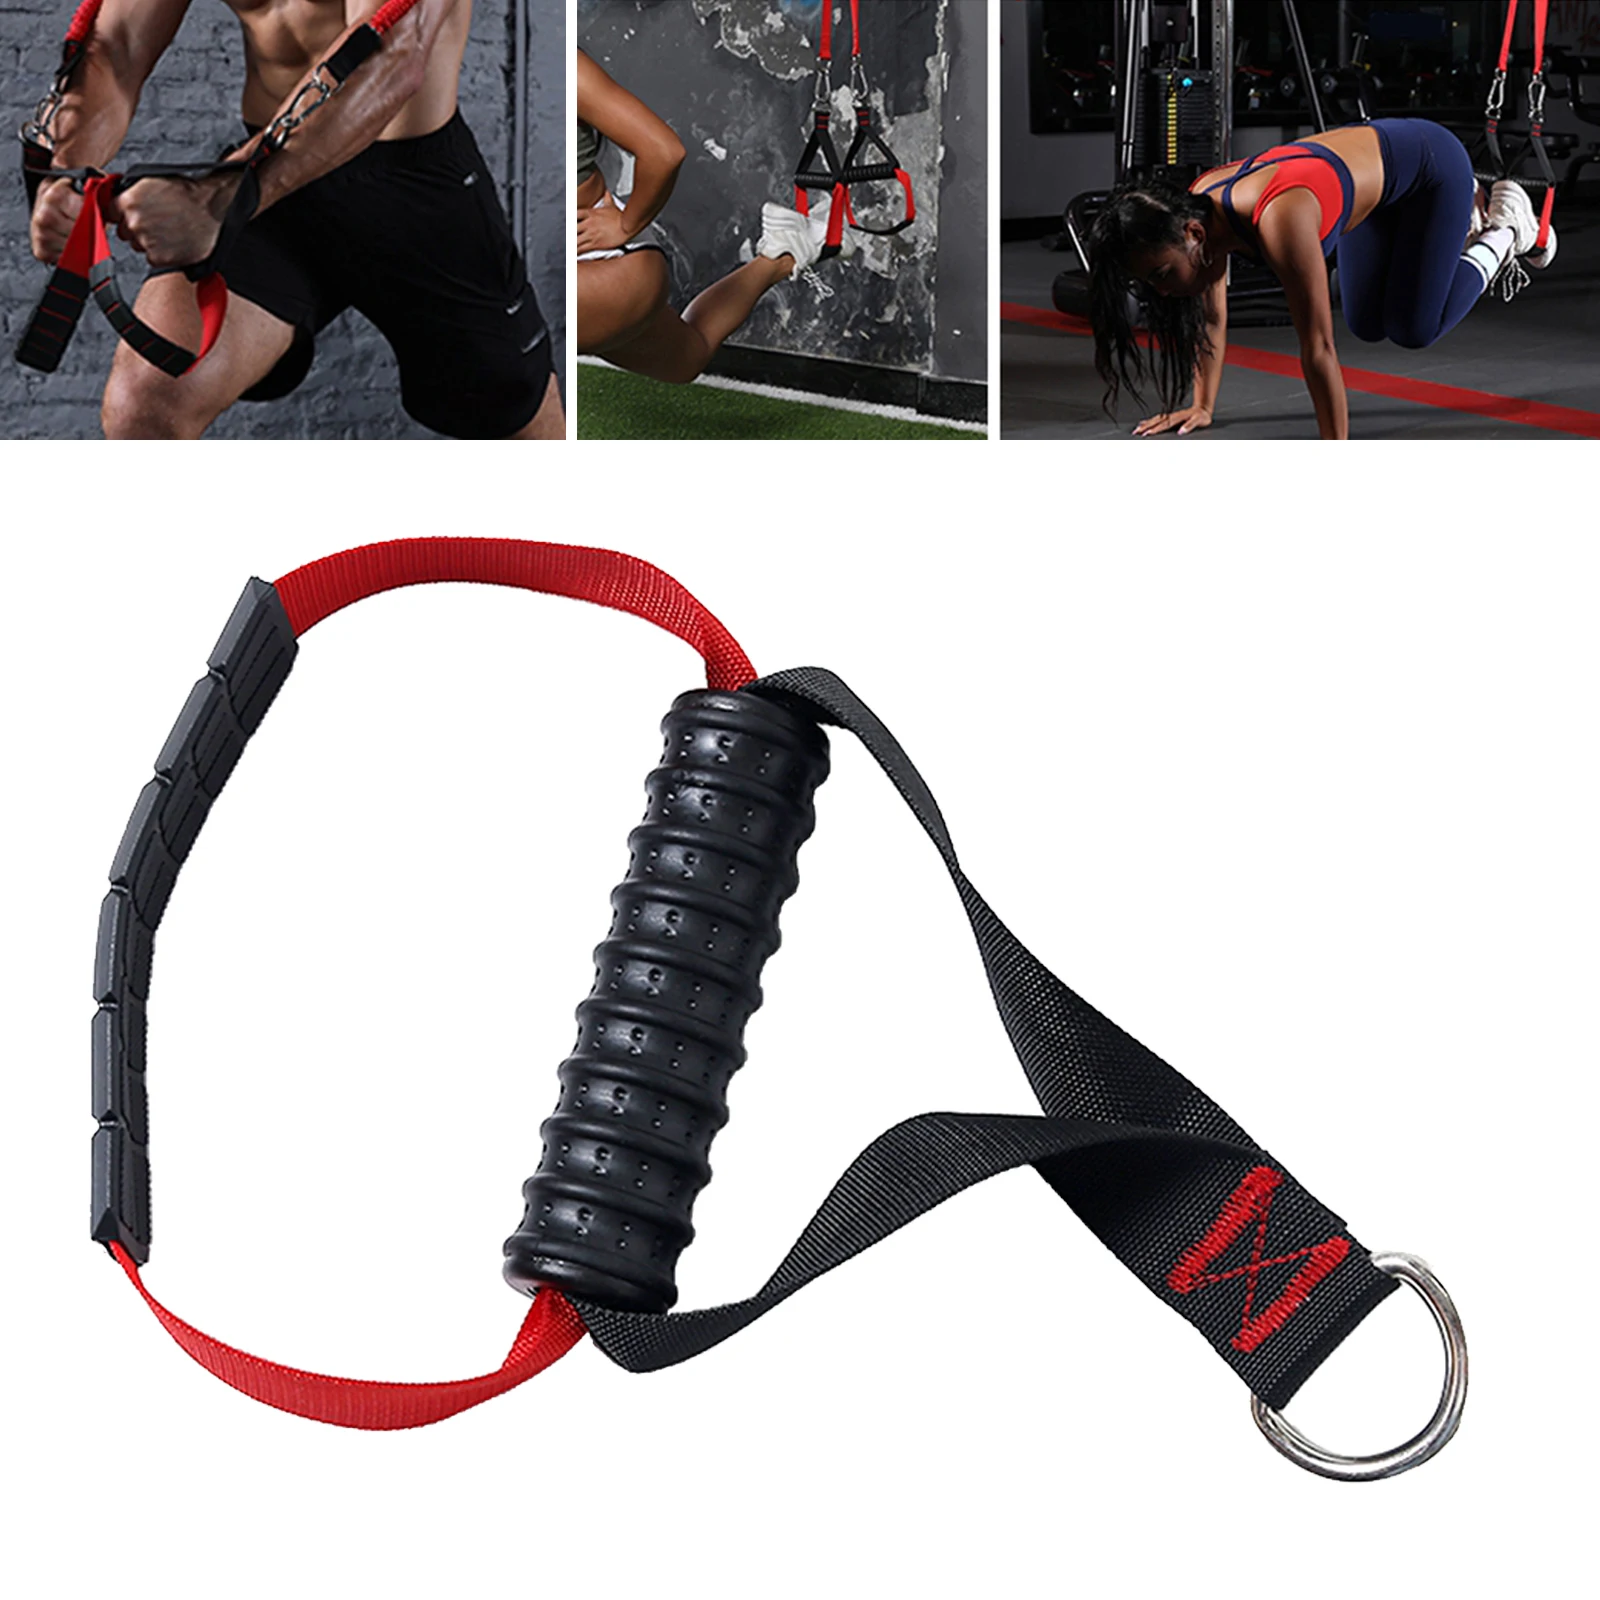 2X Premium Resistance Bands Handle Grips for Cables Home Exercise Fitness